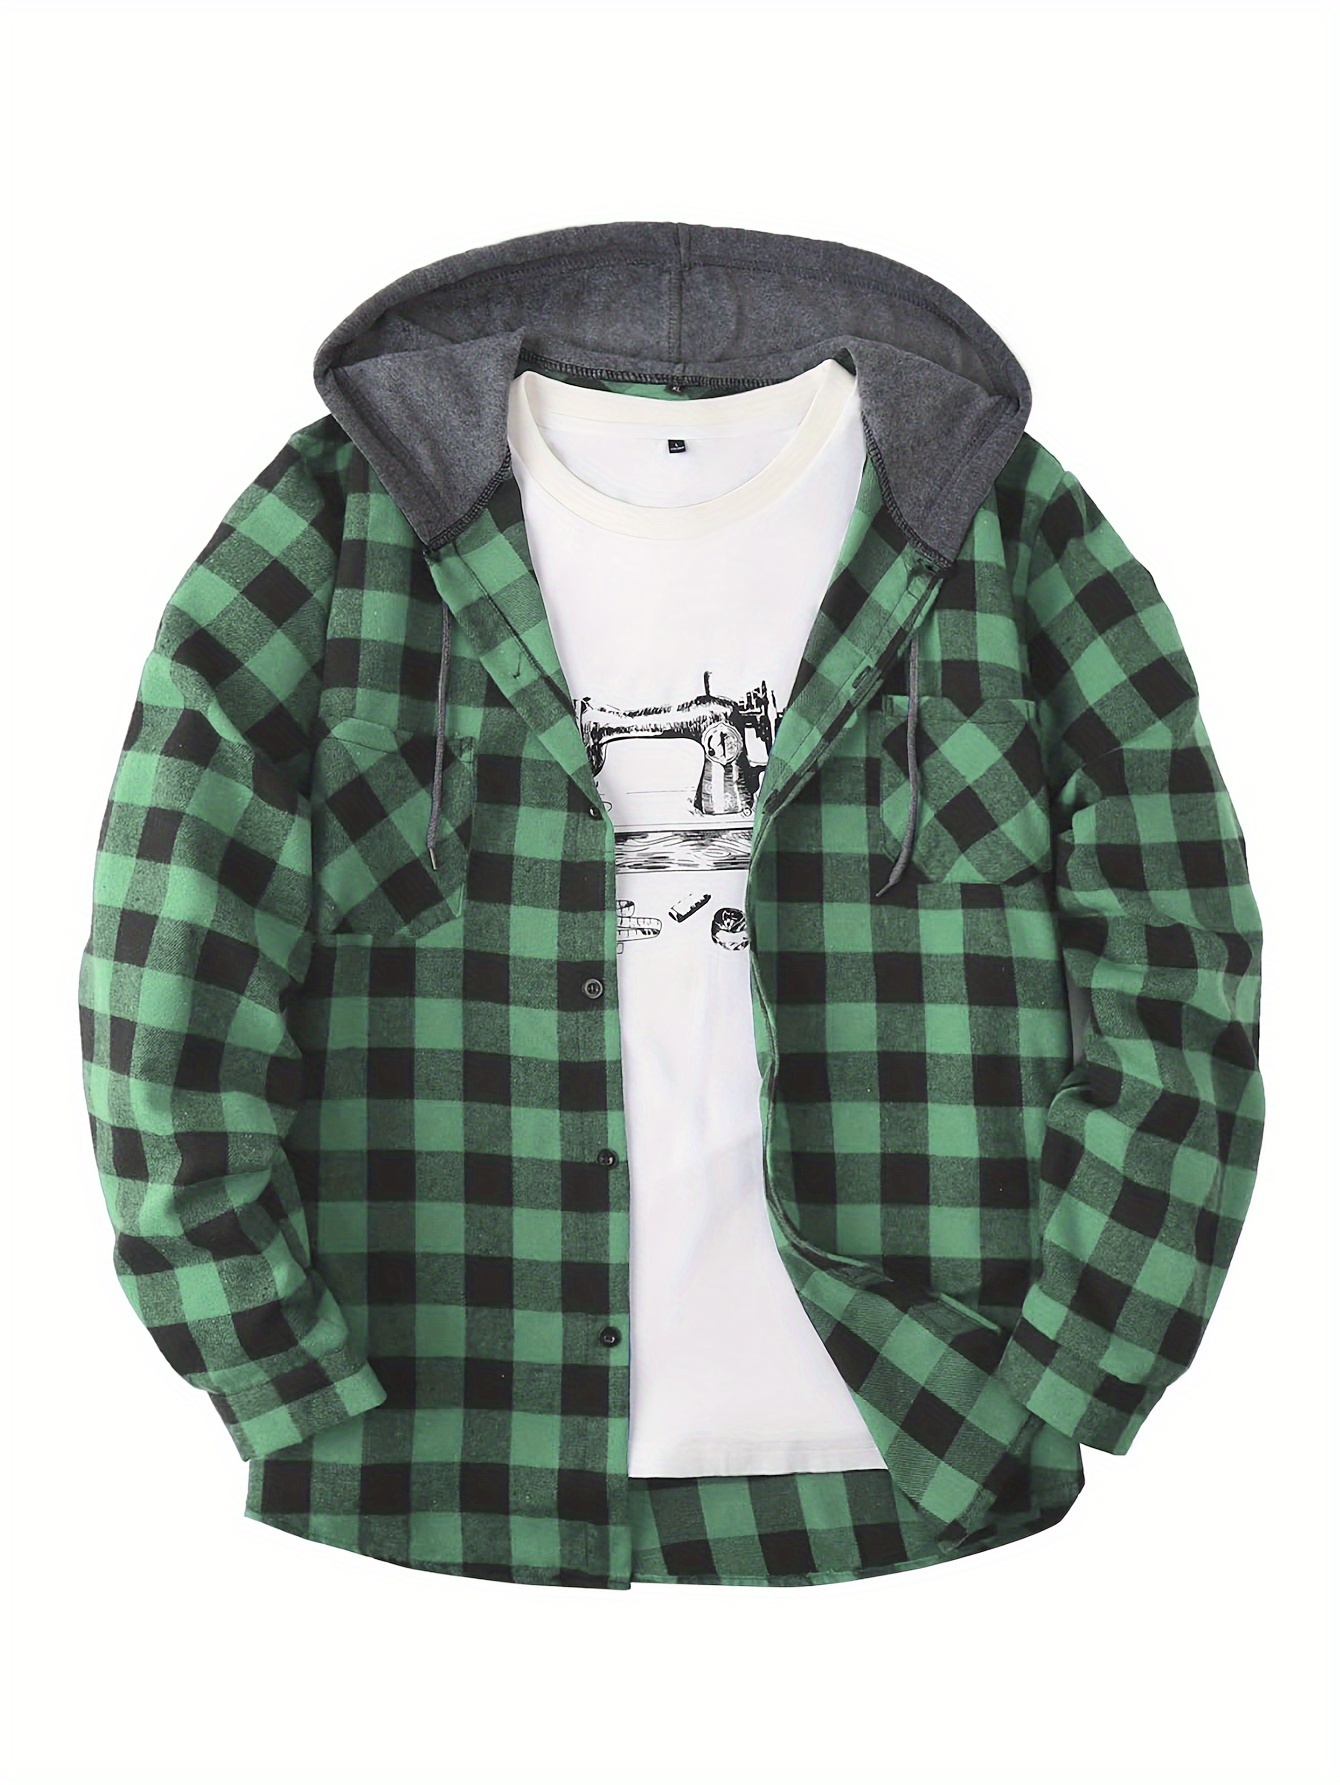 Plaid Shirt Coat For Men Long Sleeve Casual Regular Fit Button Up Hooded  Shirts Jacket